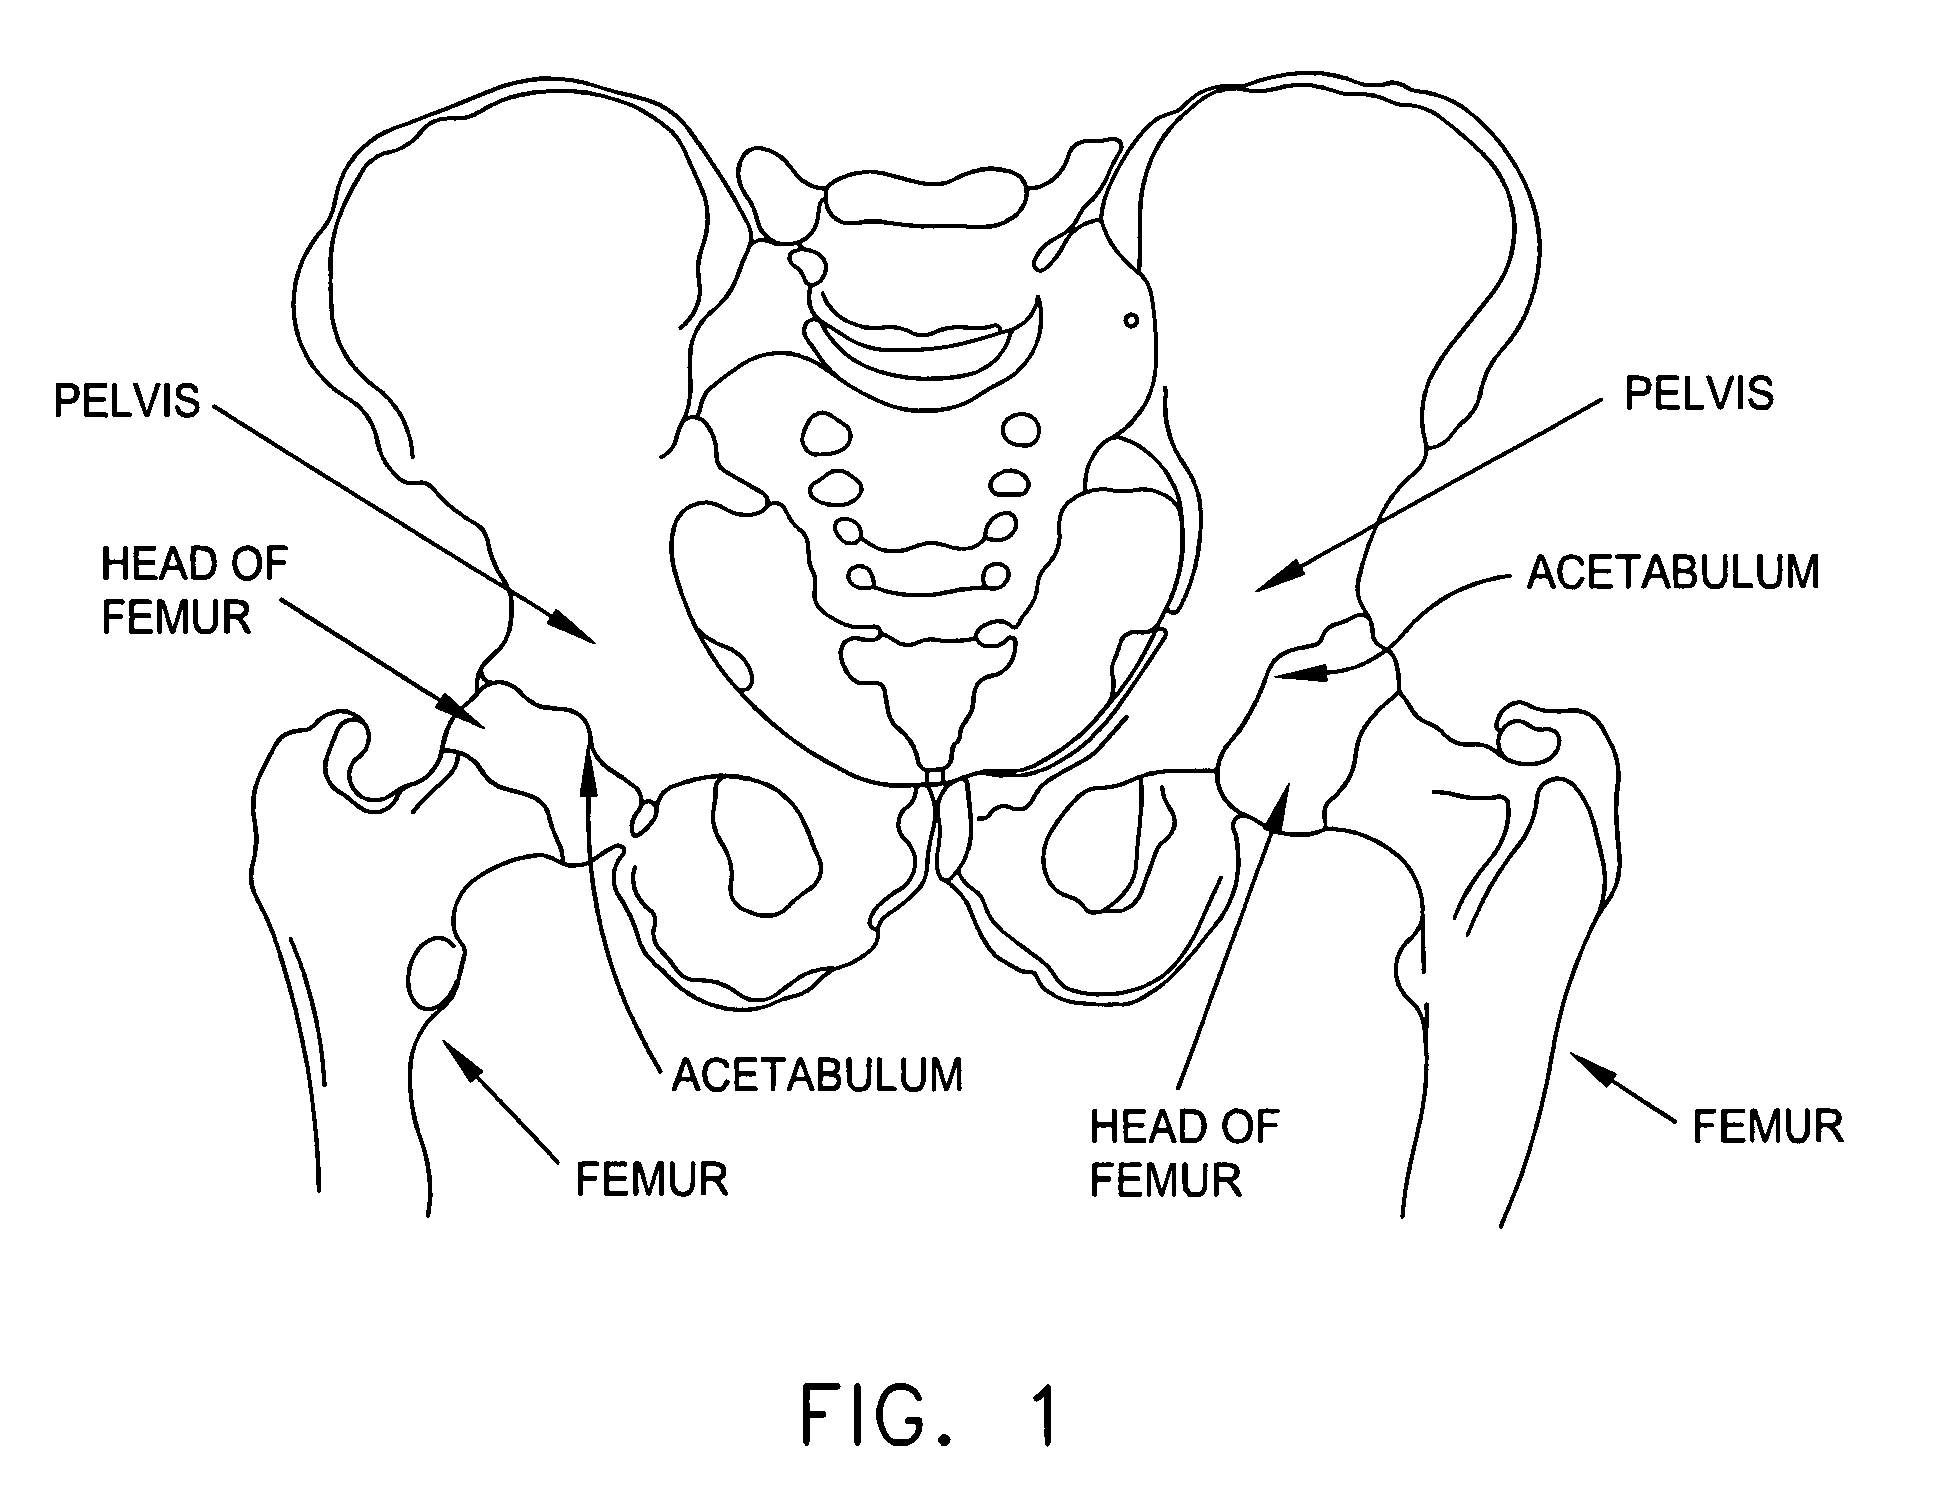 Computer-guided system for orienting the acetabular cup in the pelvis during total hip replacement surgery